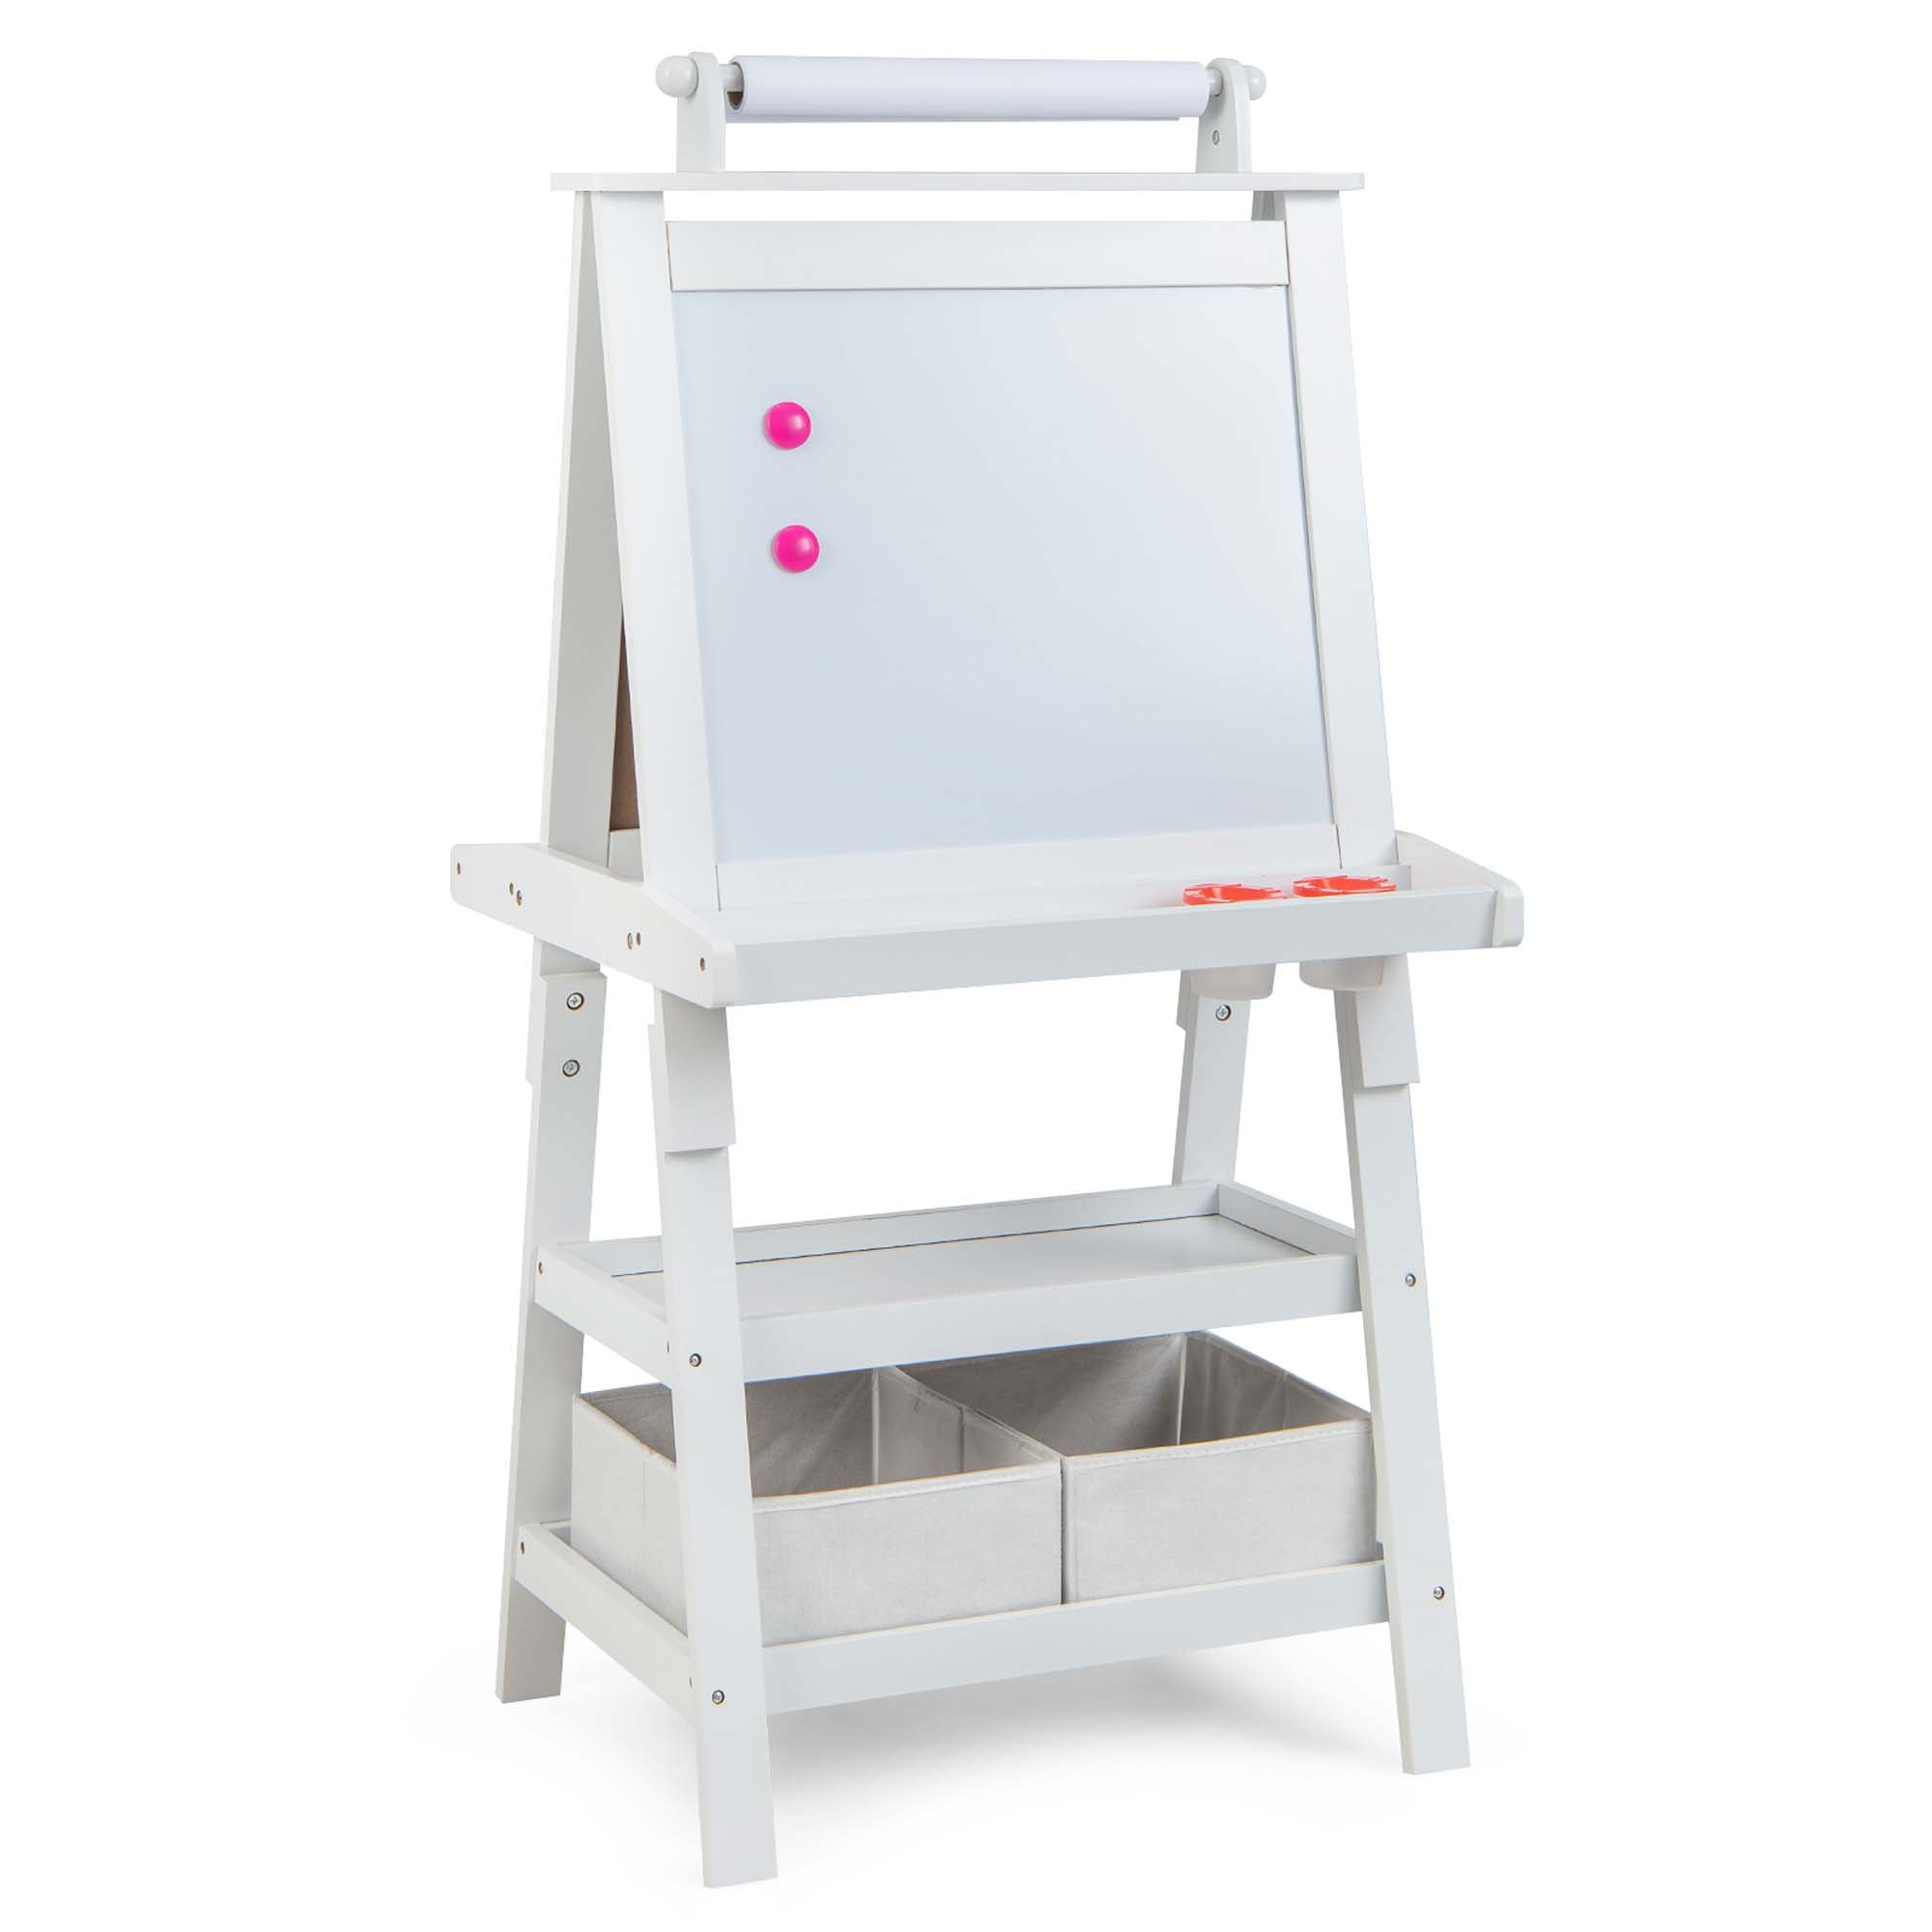 HOMCOM 3 In 1 Kid's Wooden Art Easel with Dual-Sides and Storage Baske –